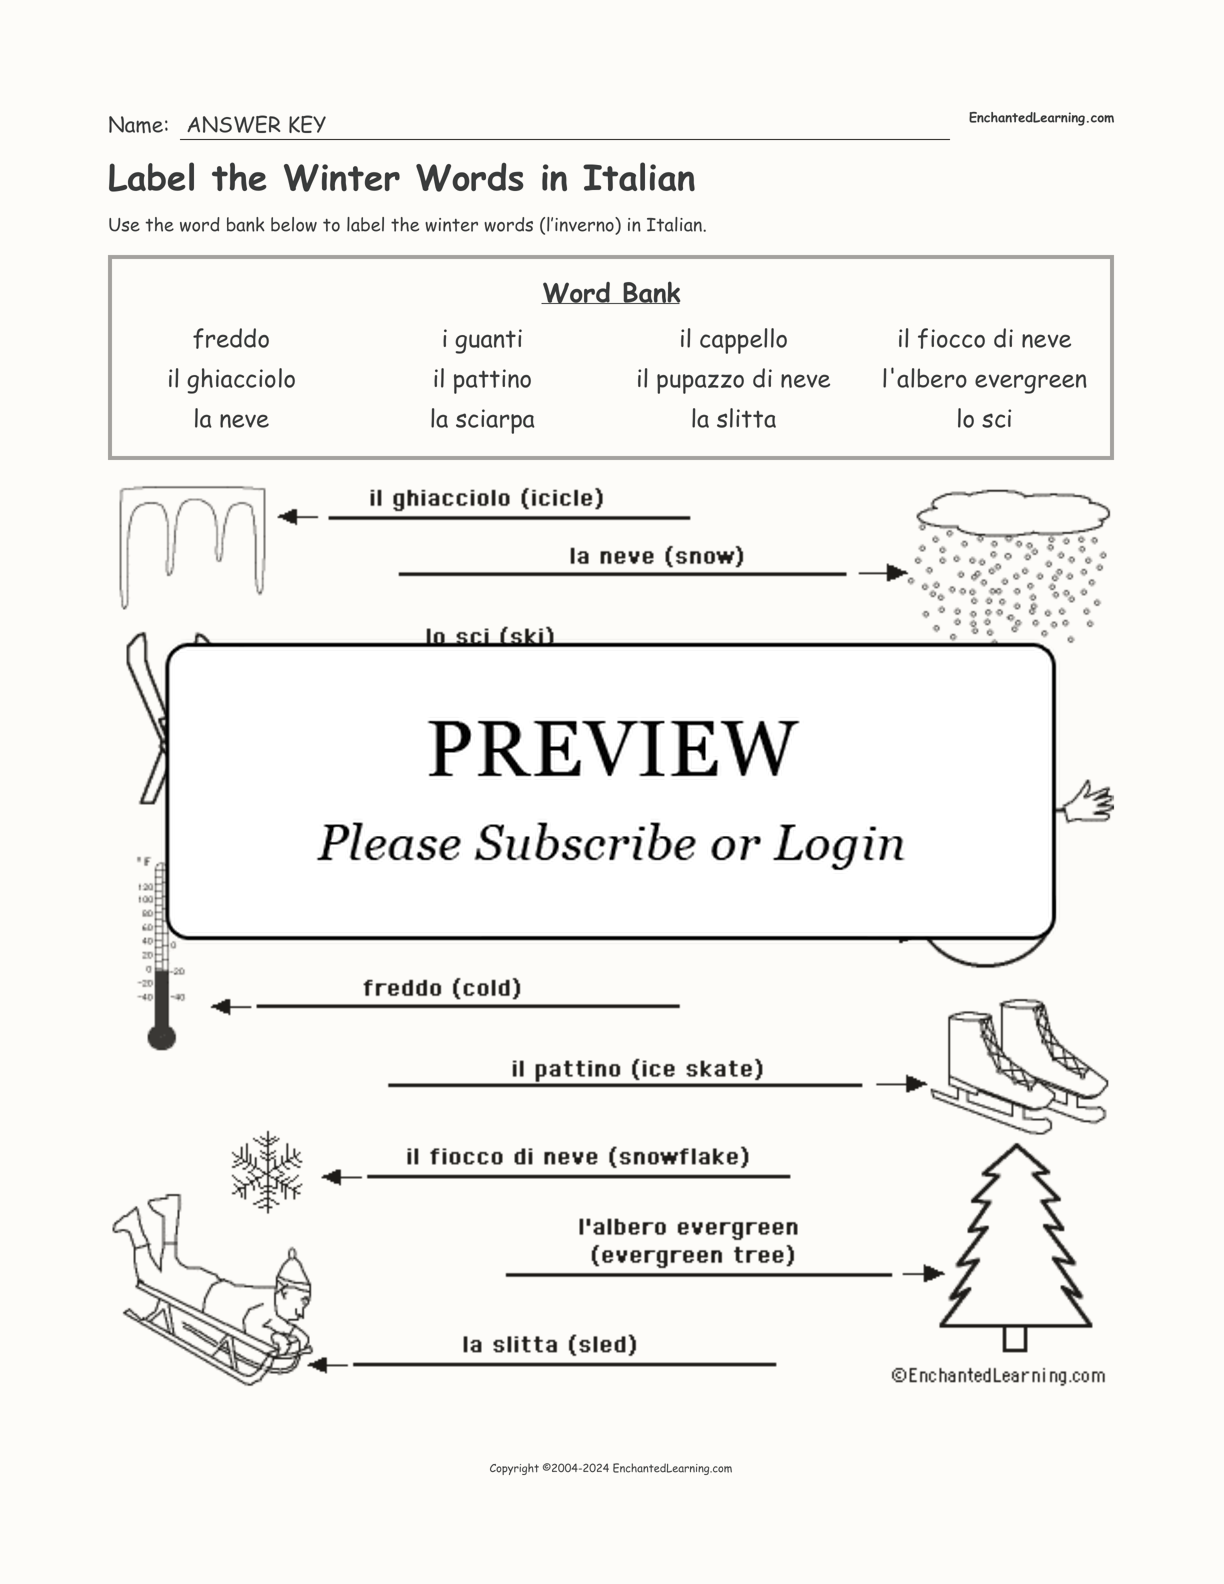 Label the Winter Words in Italian interactive worksheet page 2